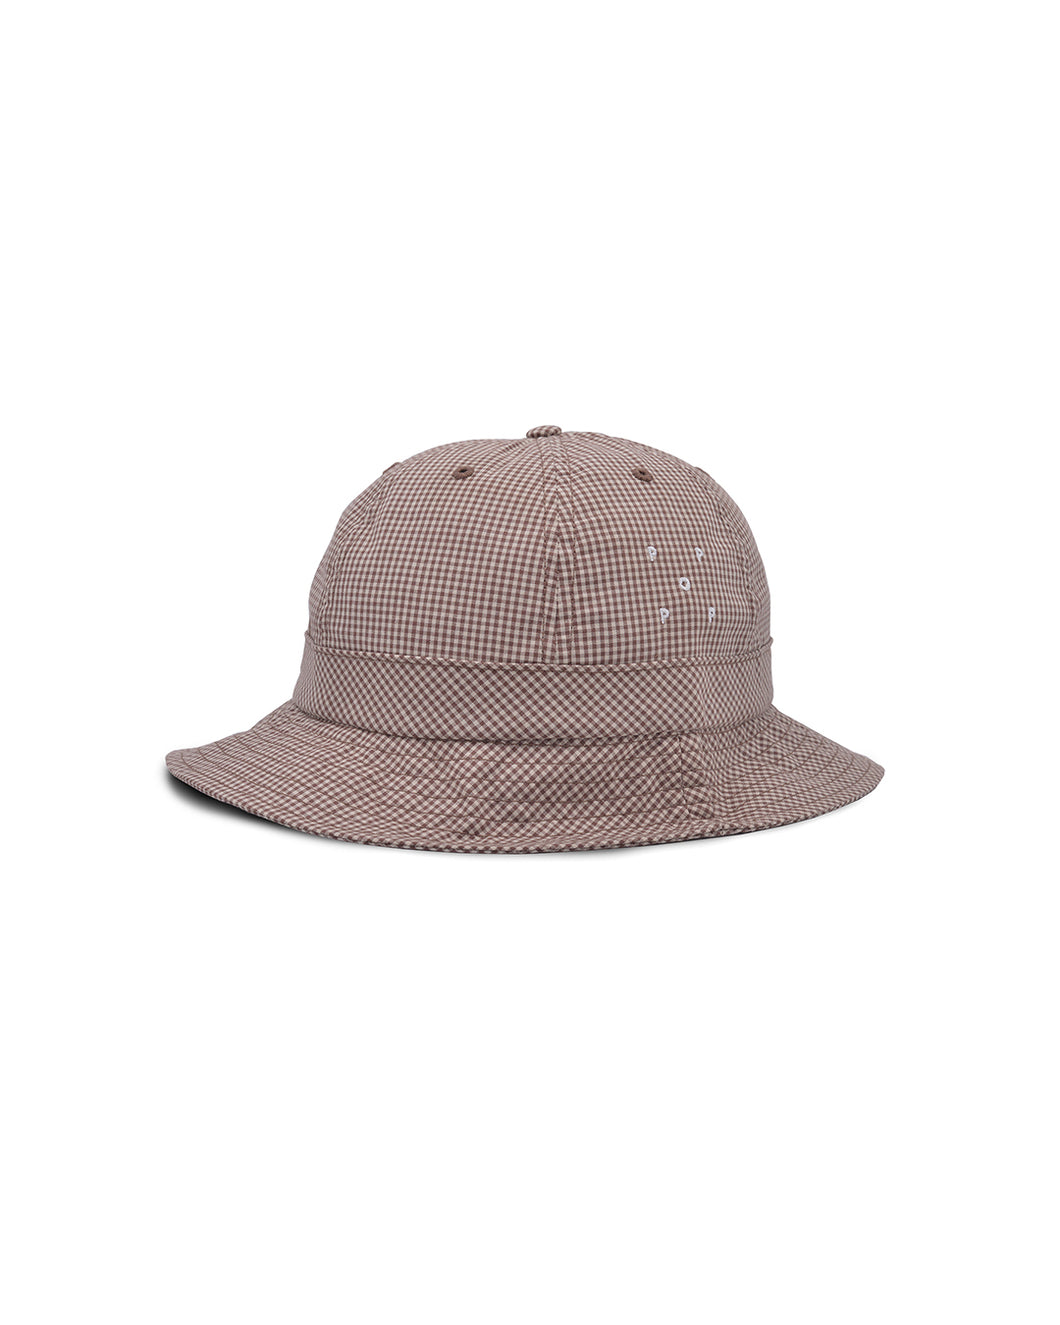 BELL HAT - BROWN GINGHAM